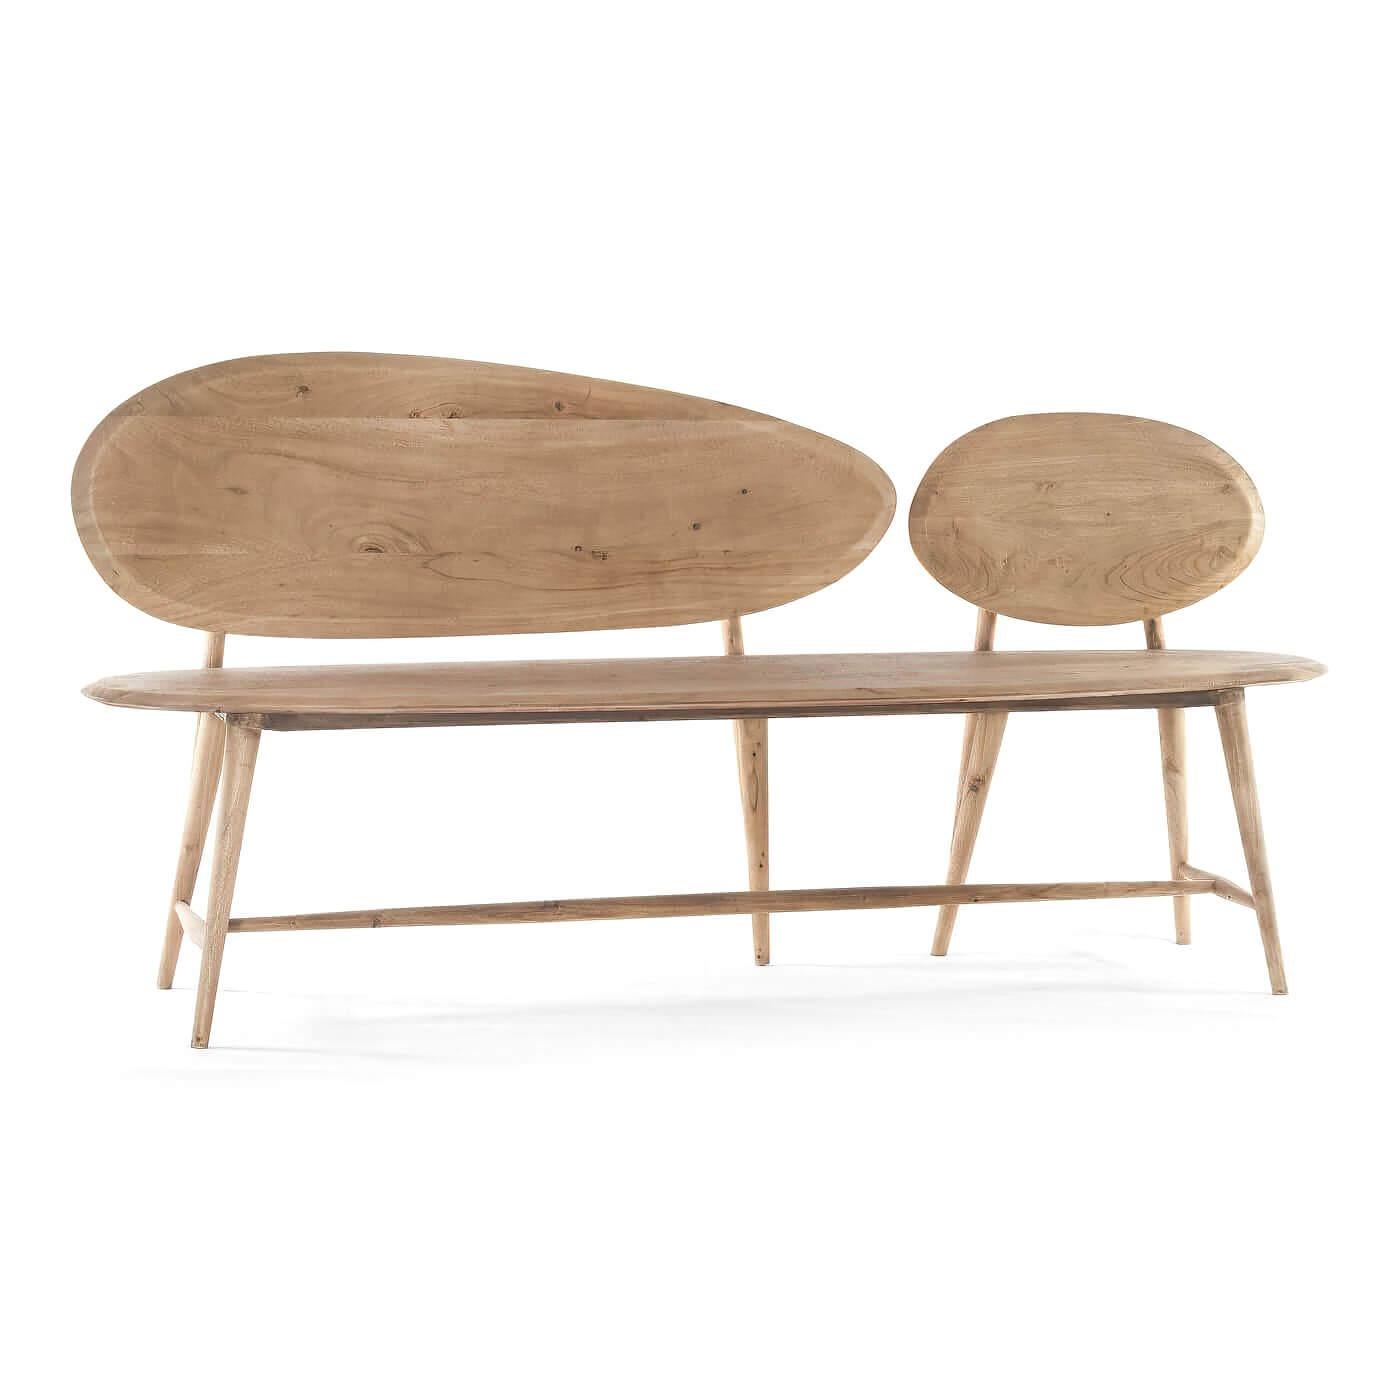 An organic modern natural wood bench. This bench has a flair for the arts and is inspired by boulders and pebbles found in natural landscapes. It is hand-crafted and carved out of solid acacia and has a natural finish. Its unique abstract design